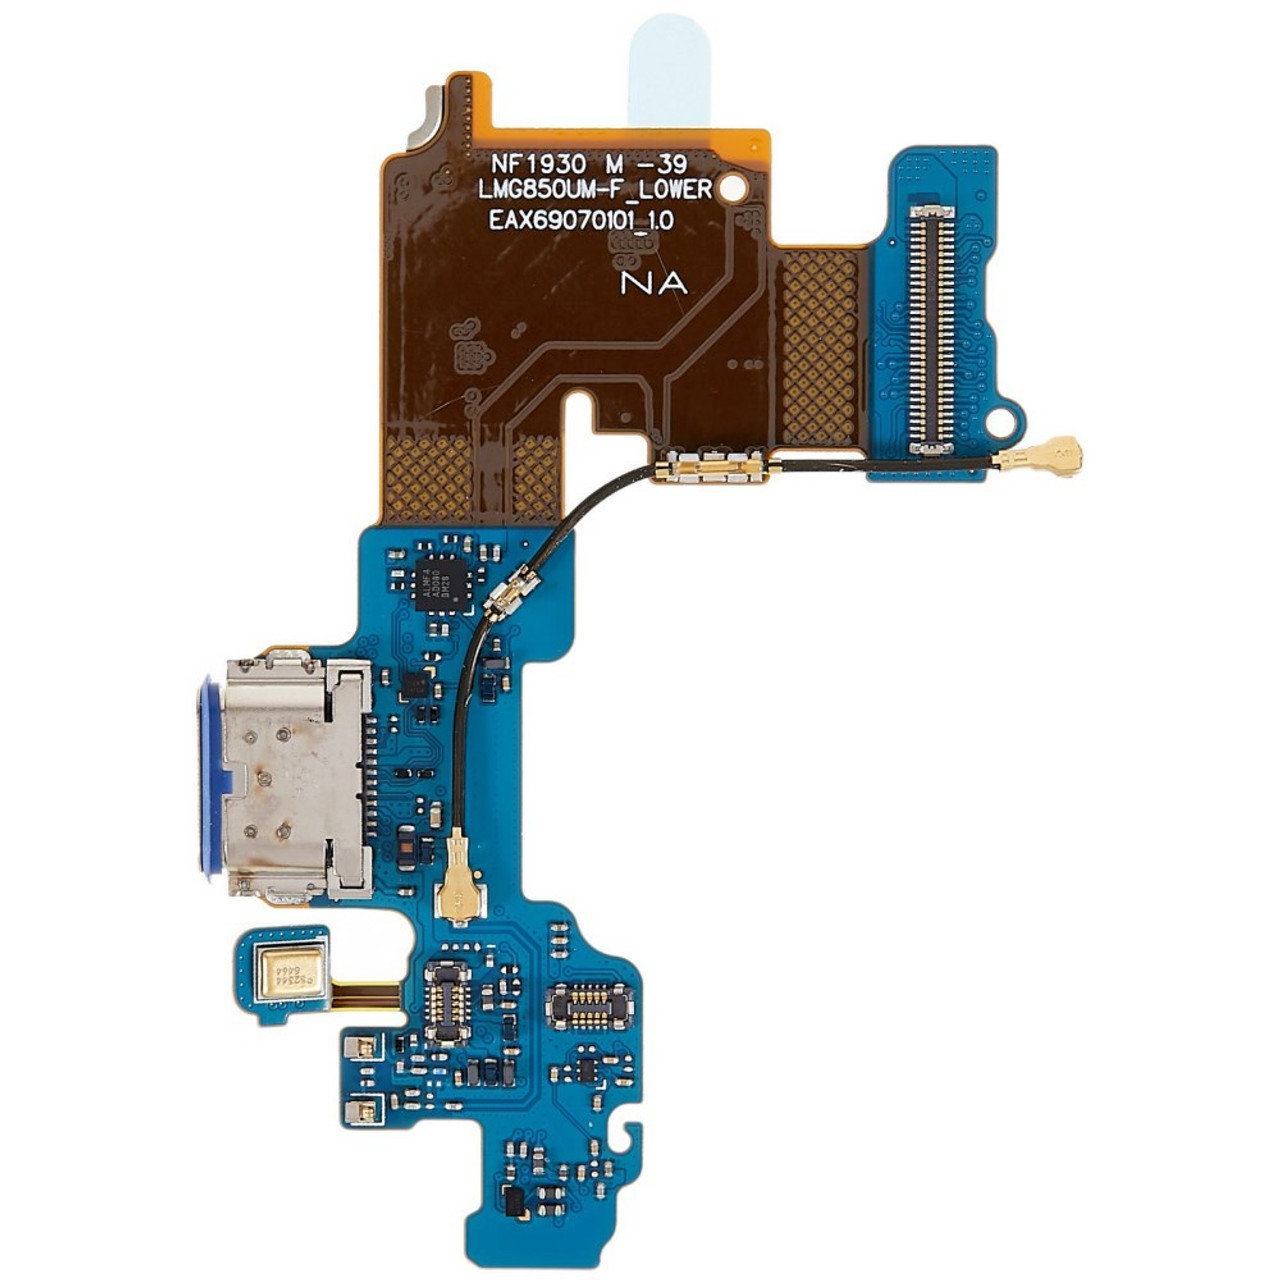 OEM Charger Charging Port Dock Flex Cable Replacement Part For